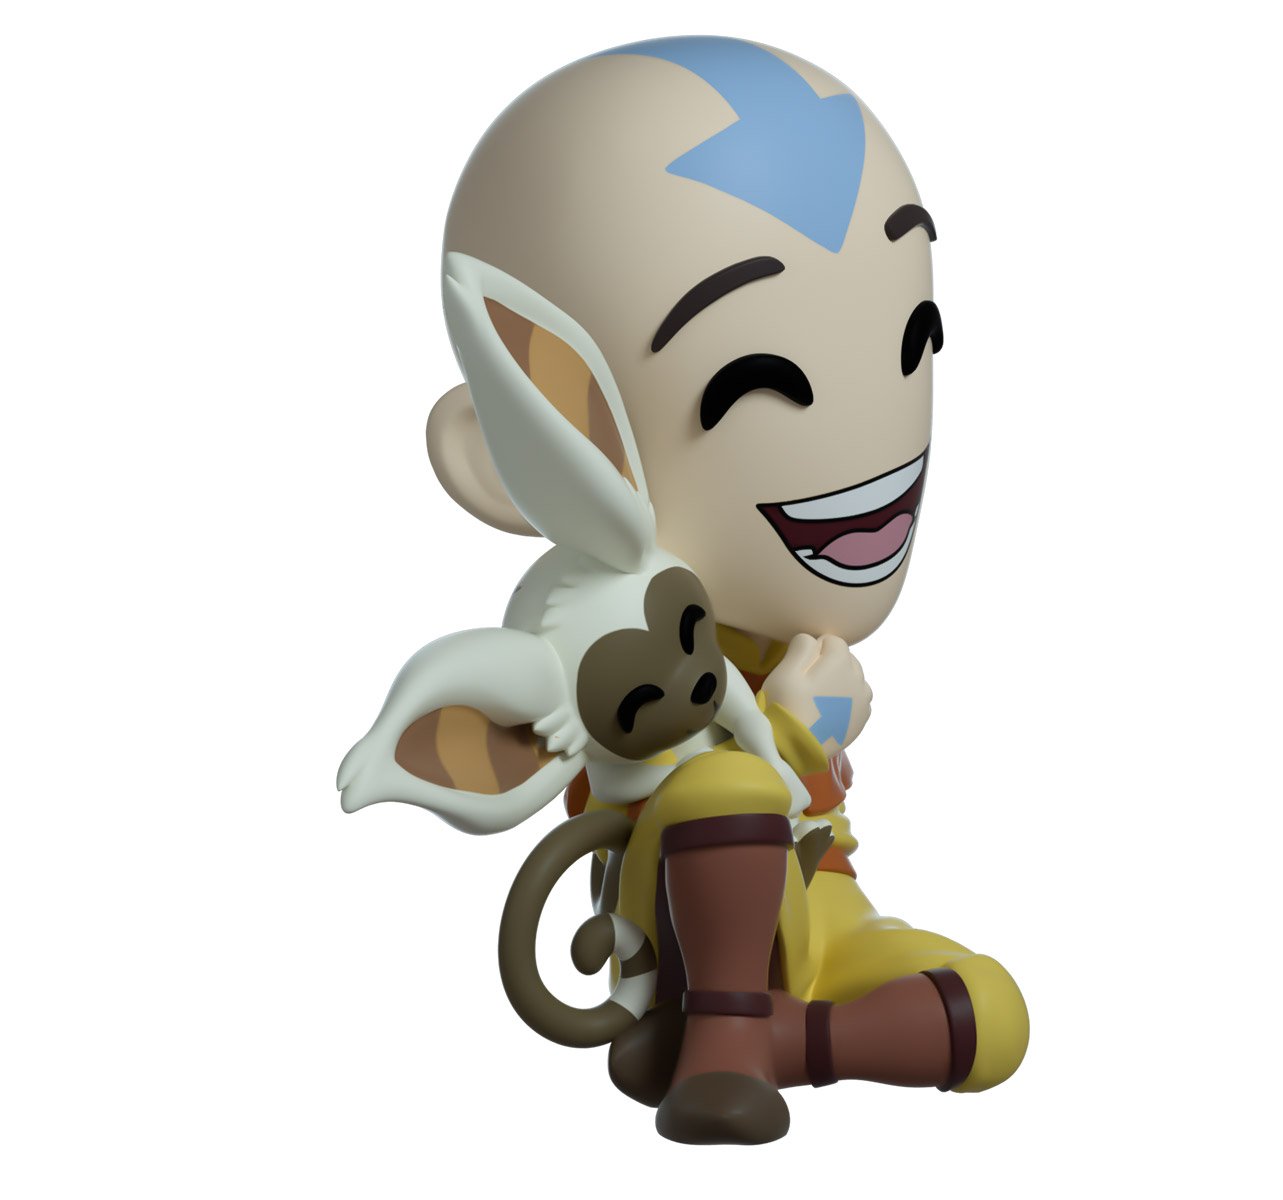 Avatar: The Last Airbender: Aang Toy Figure by Youtooz Collectibles